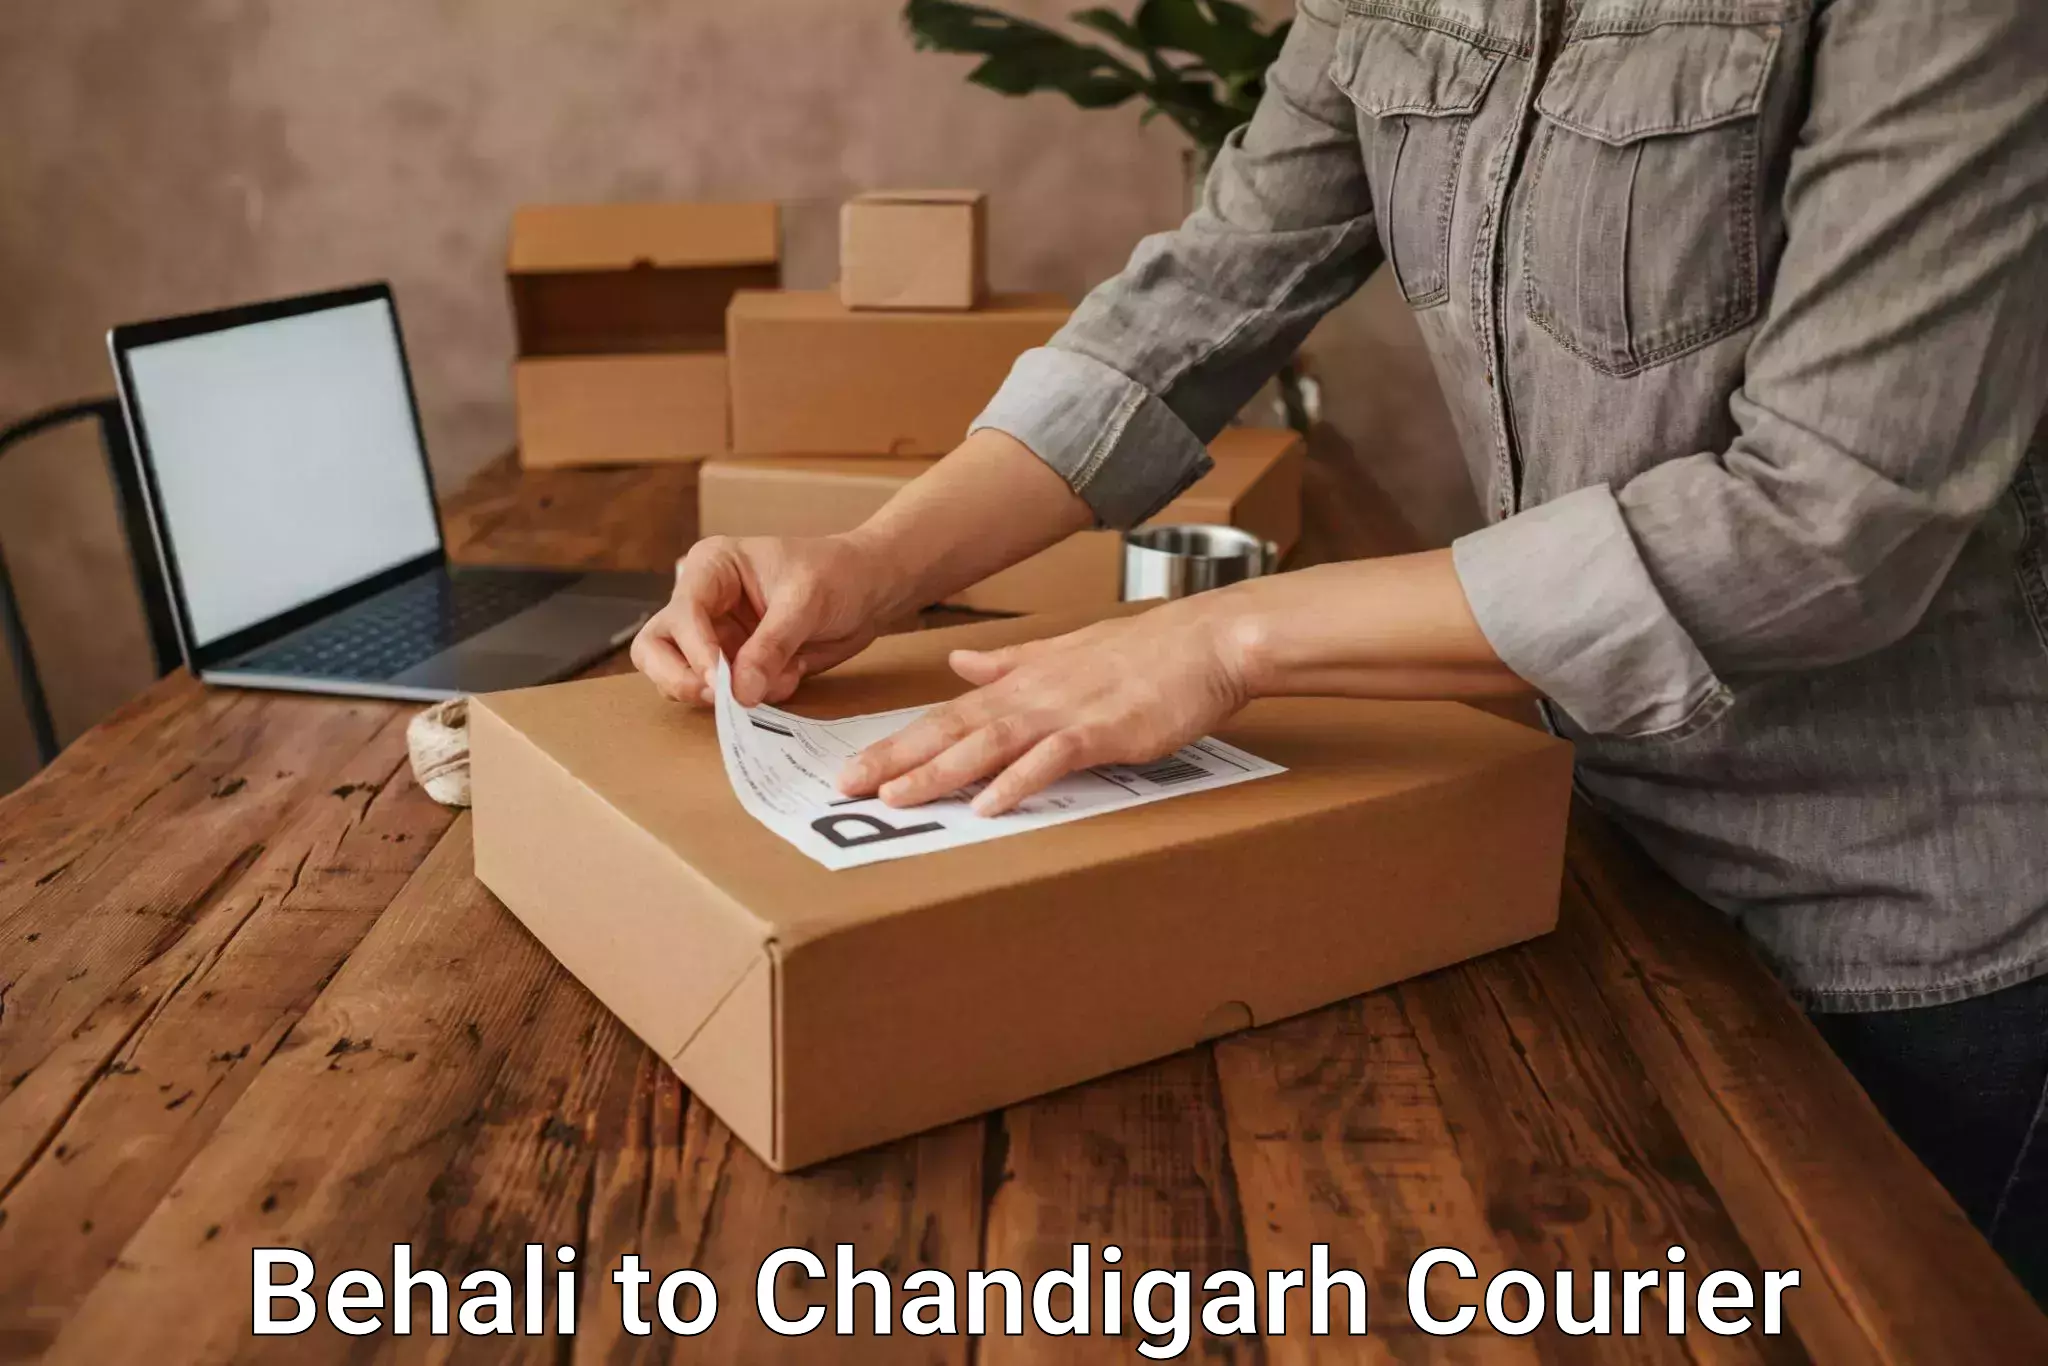 Pharmaceutical courier Behali to Chandigarh